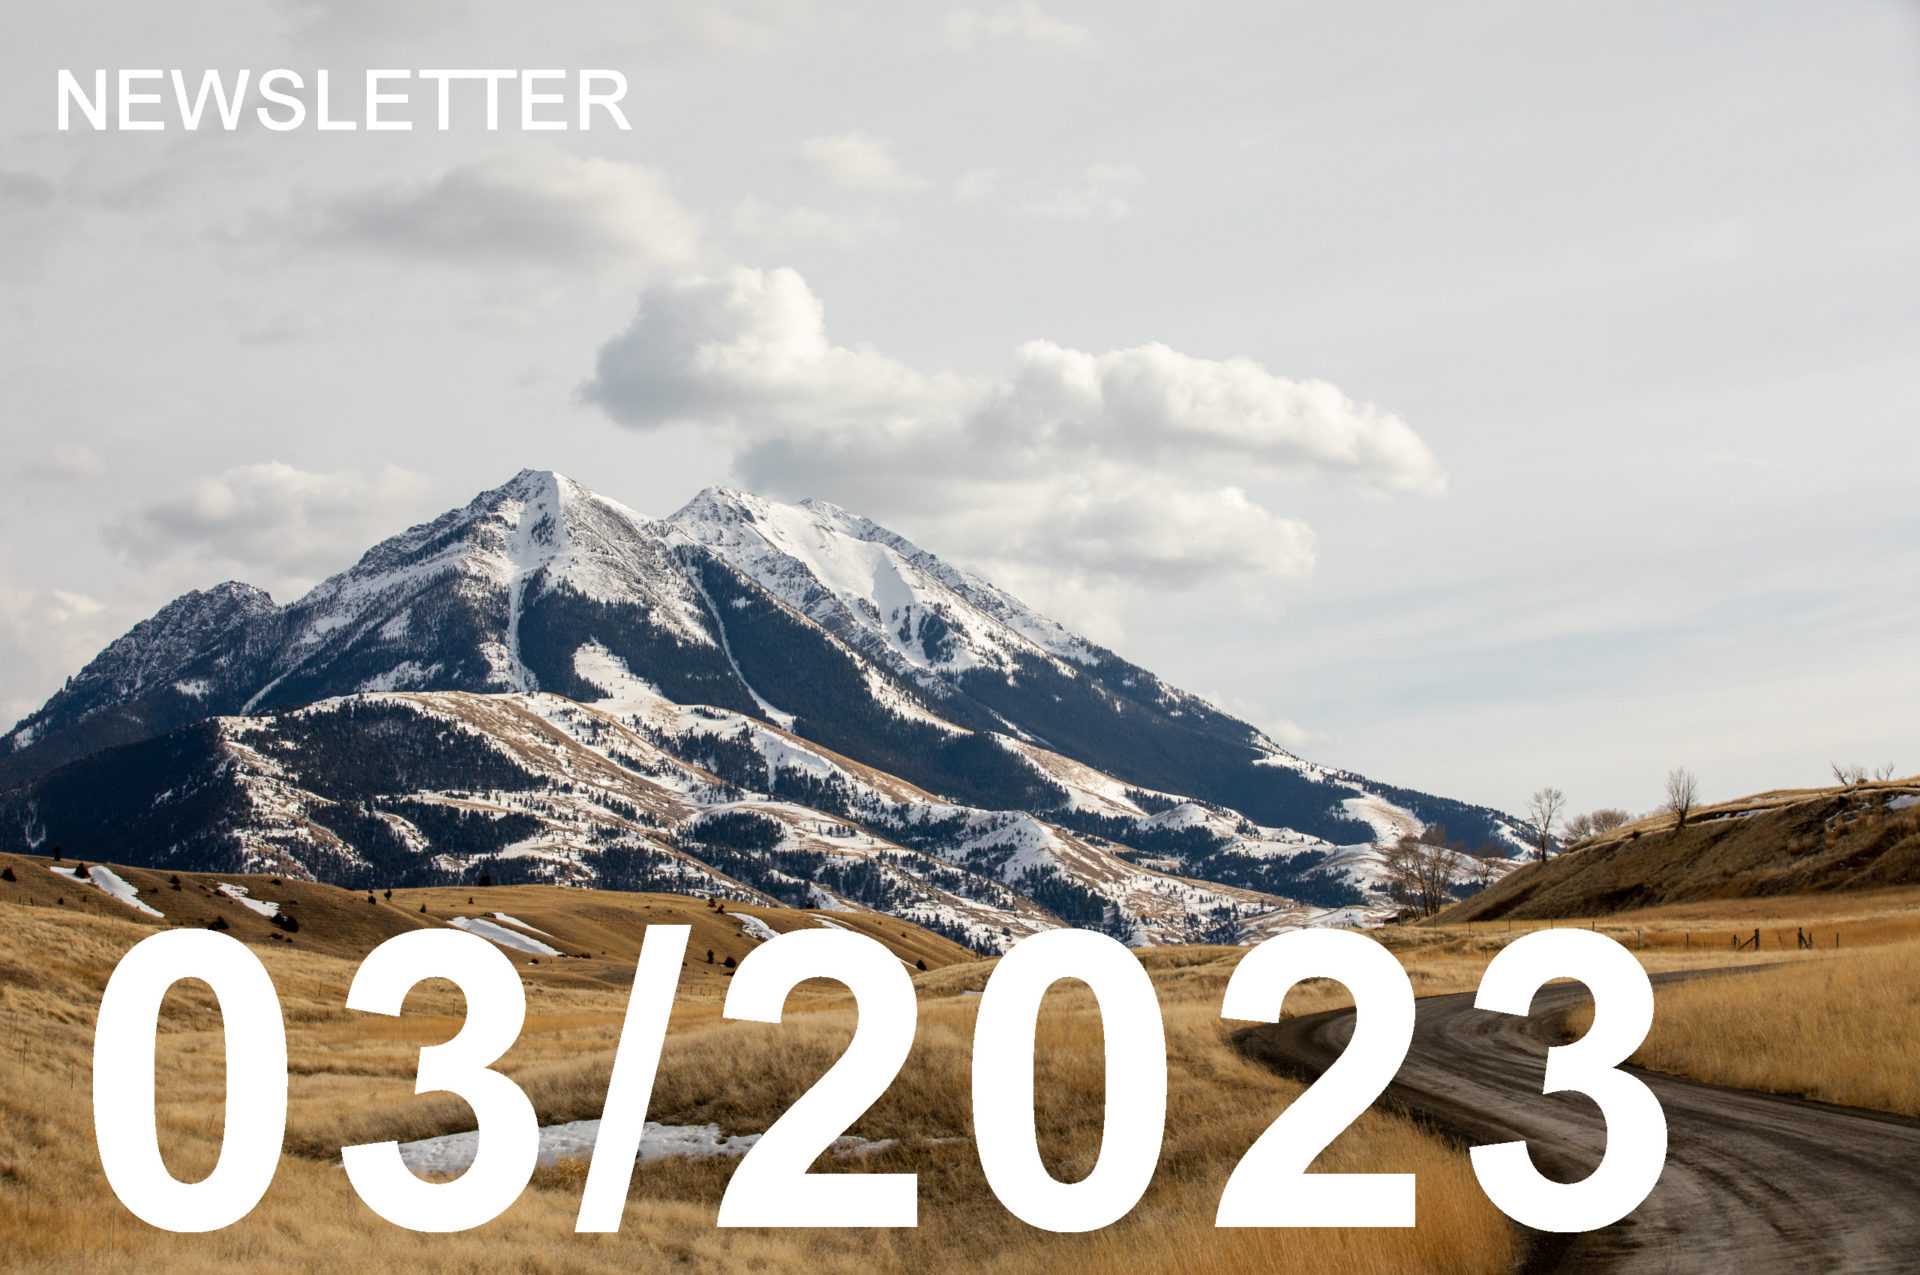 Image is a header image depicting a snow-capped Emigrant Peak in Montana with the text "Newsletter" in the upper left corner and the text "03/2023" in bold type across the bottom.